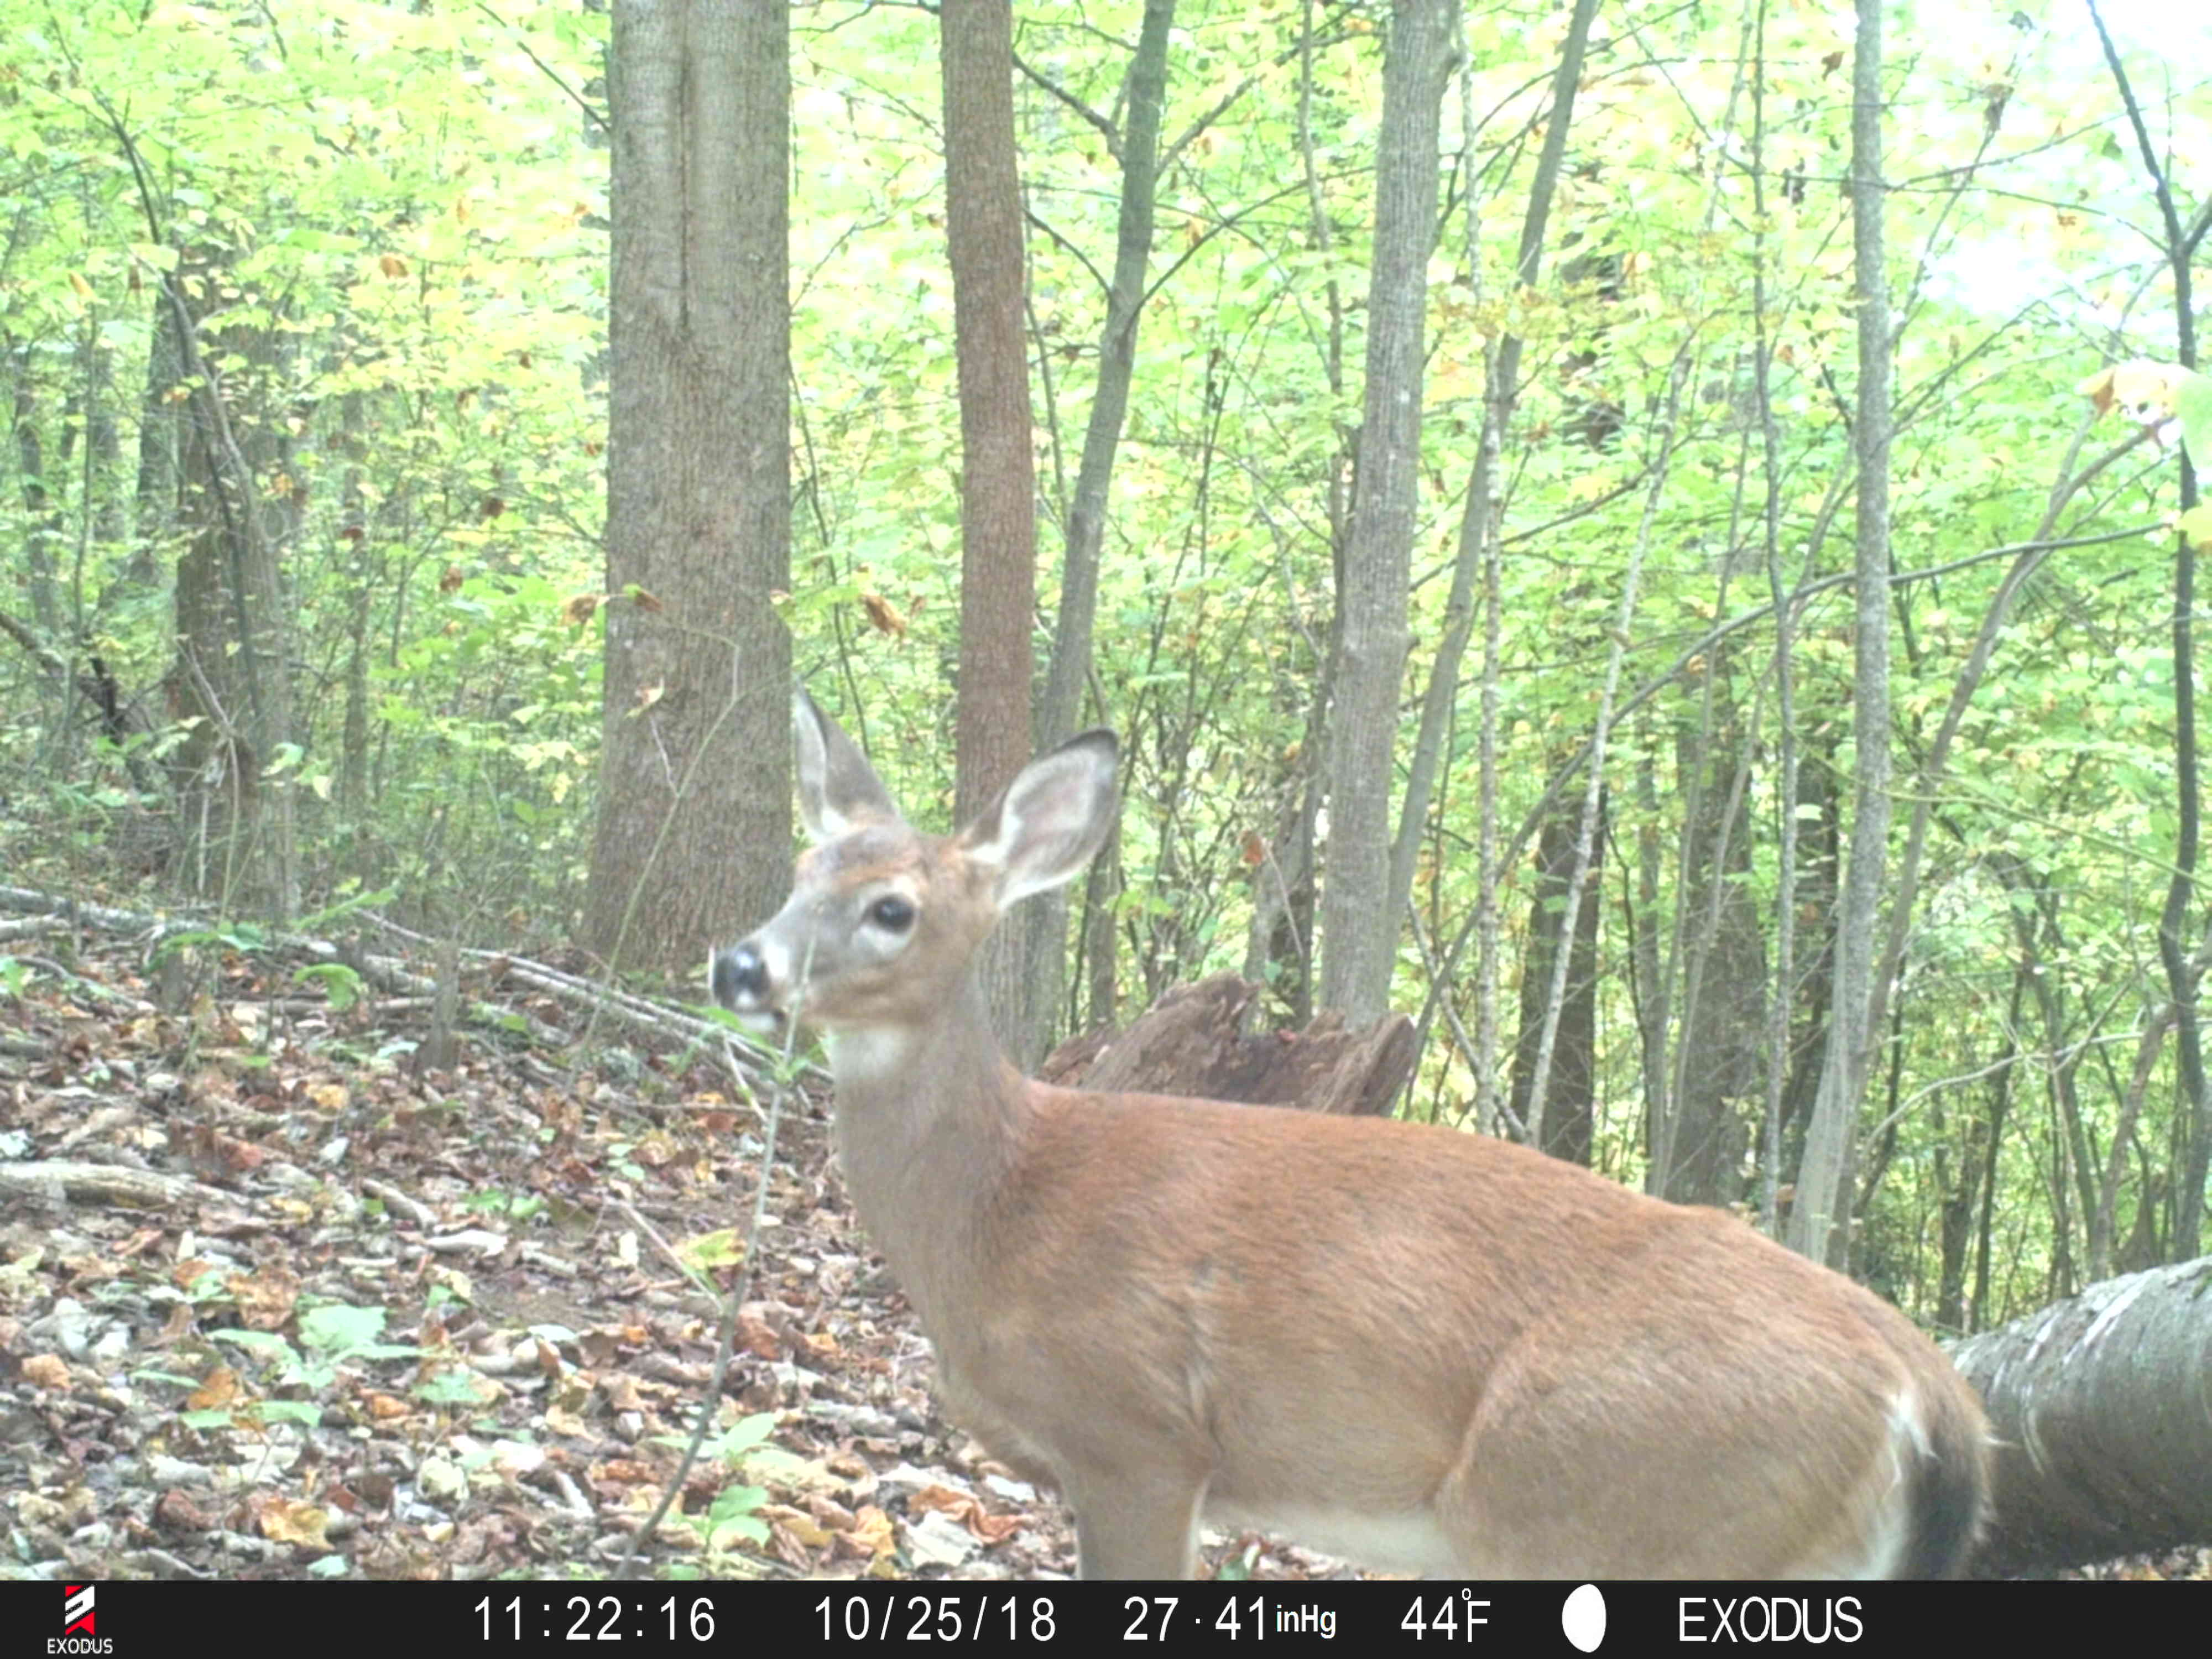 (3/4) Coon, deer, and bear! Notice the daylight pictures when most animals are not moving.